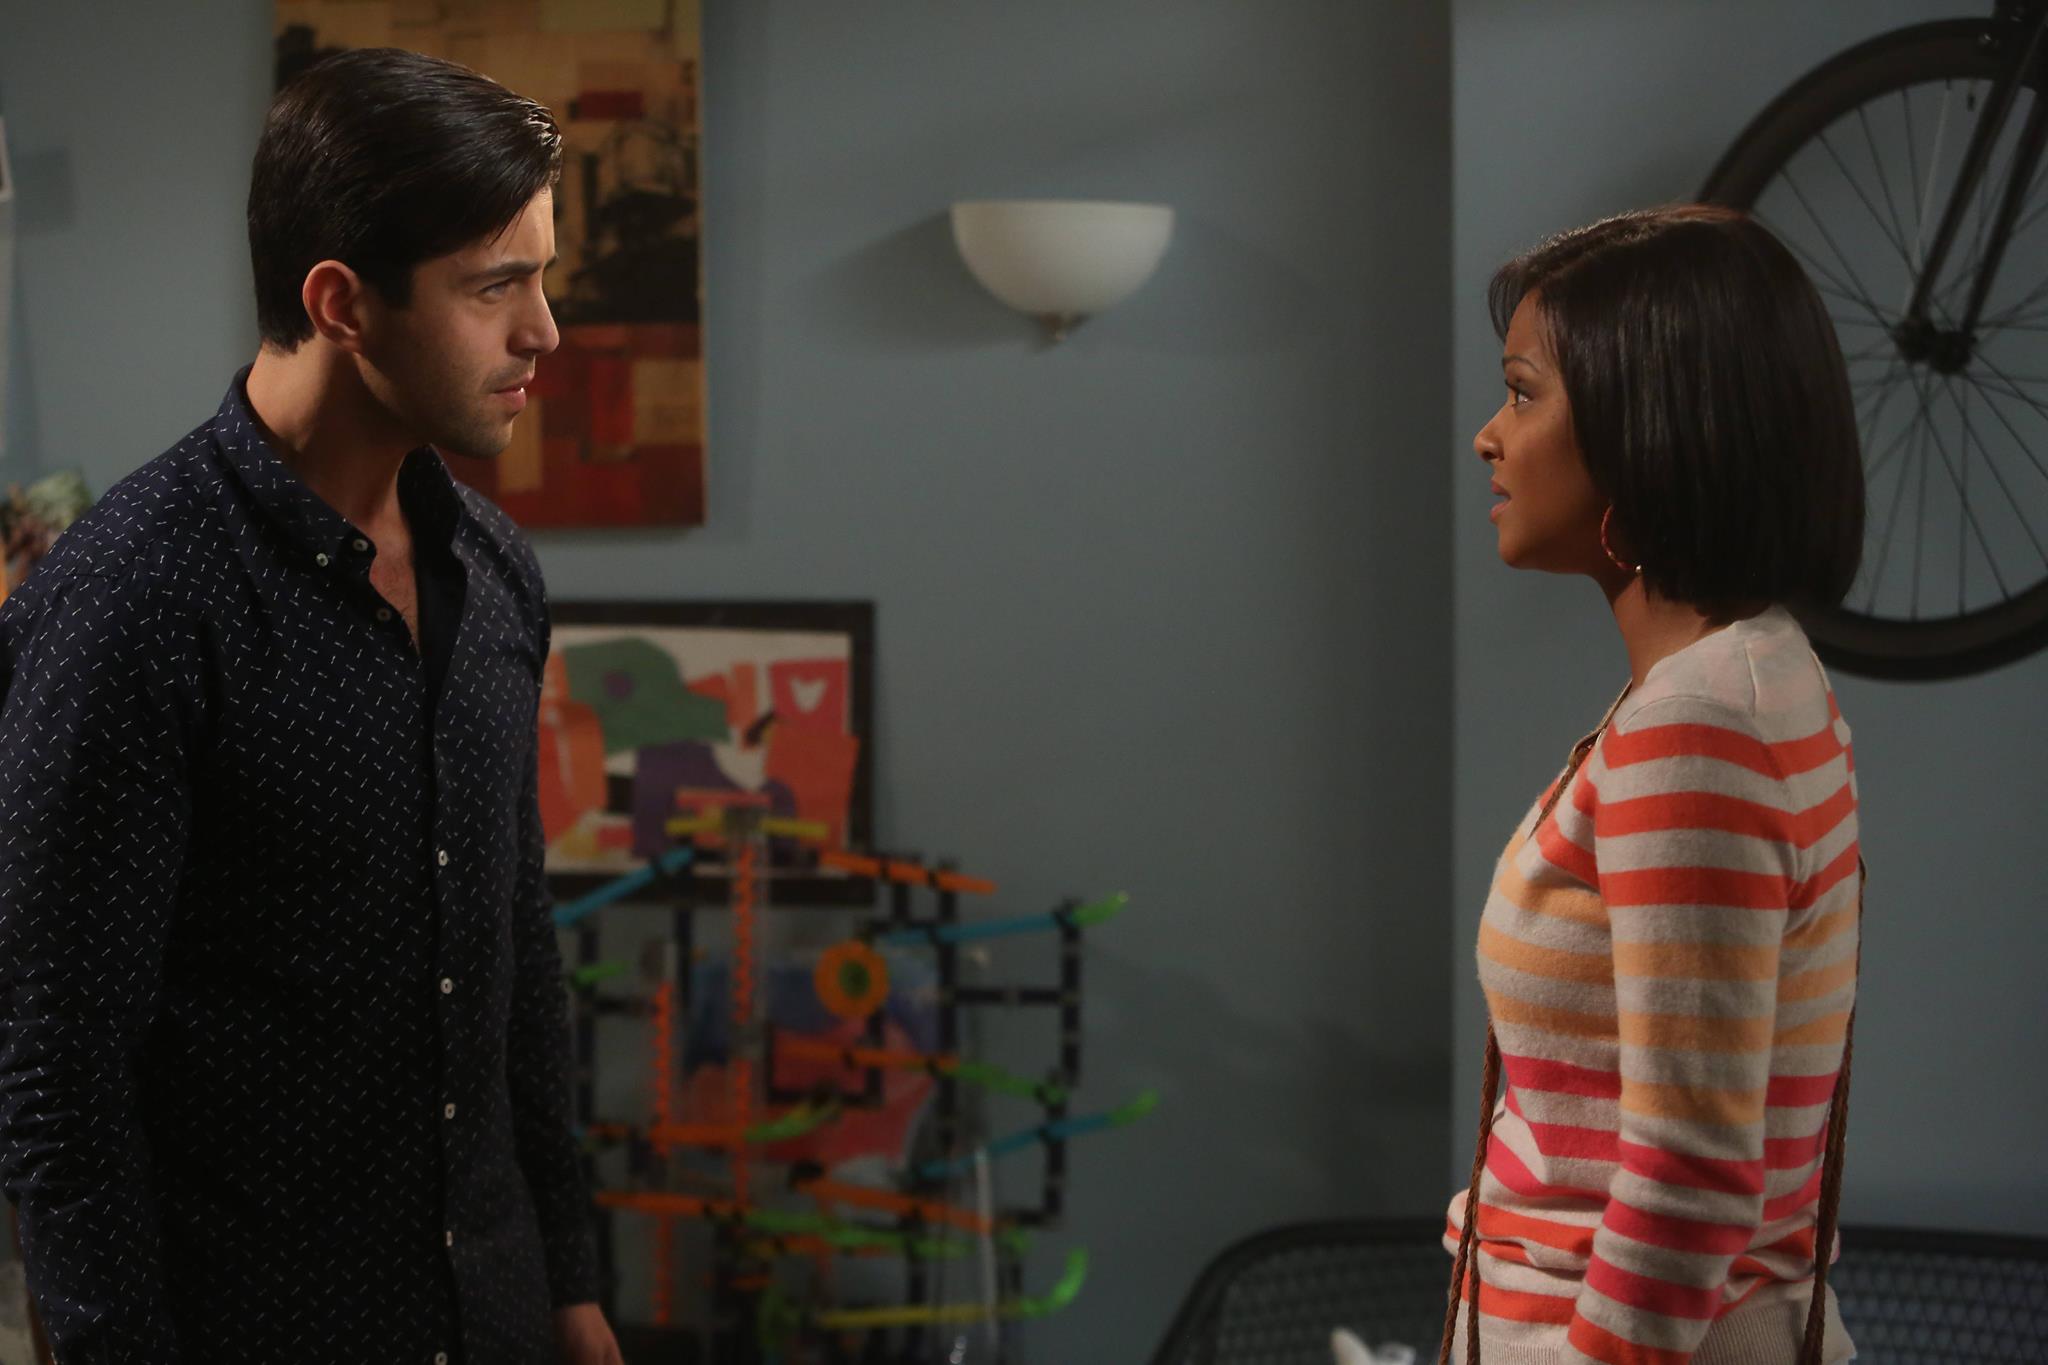 Mrs Kathy King intereview with Josh Peck star of grandfathered